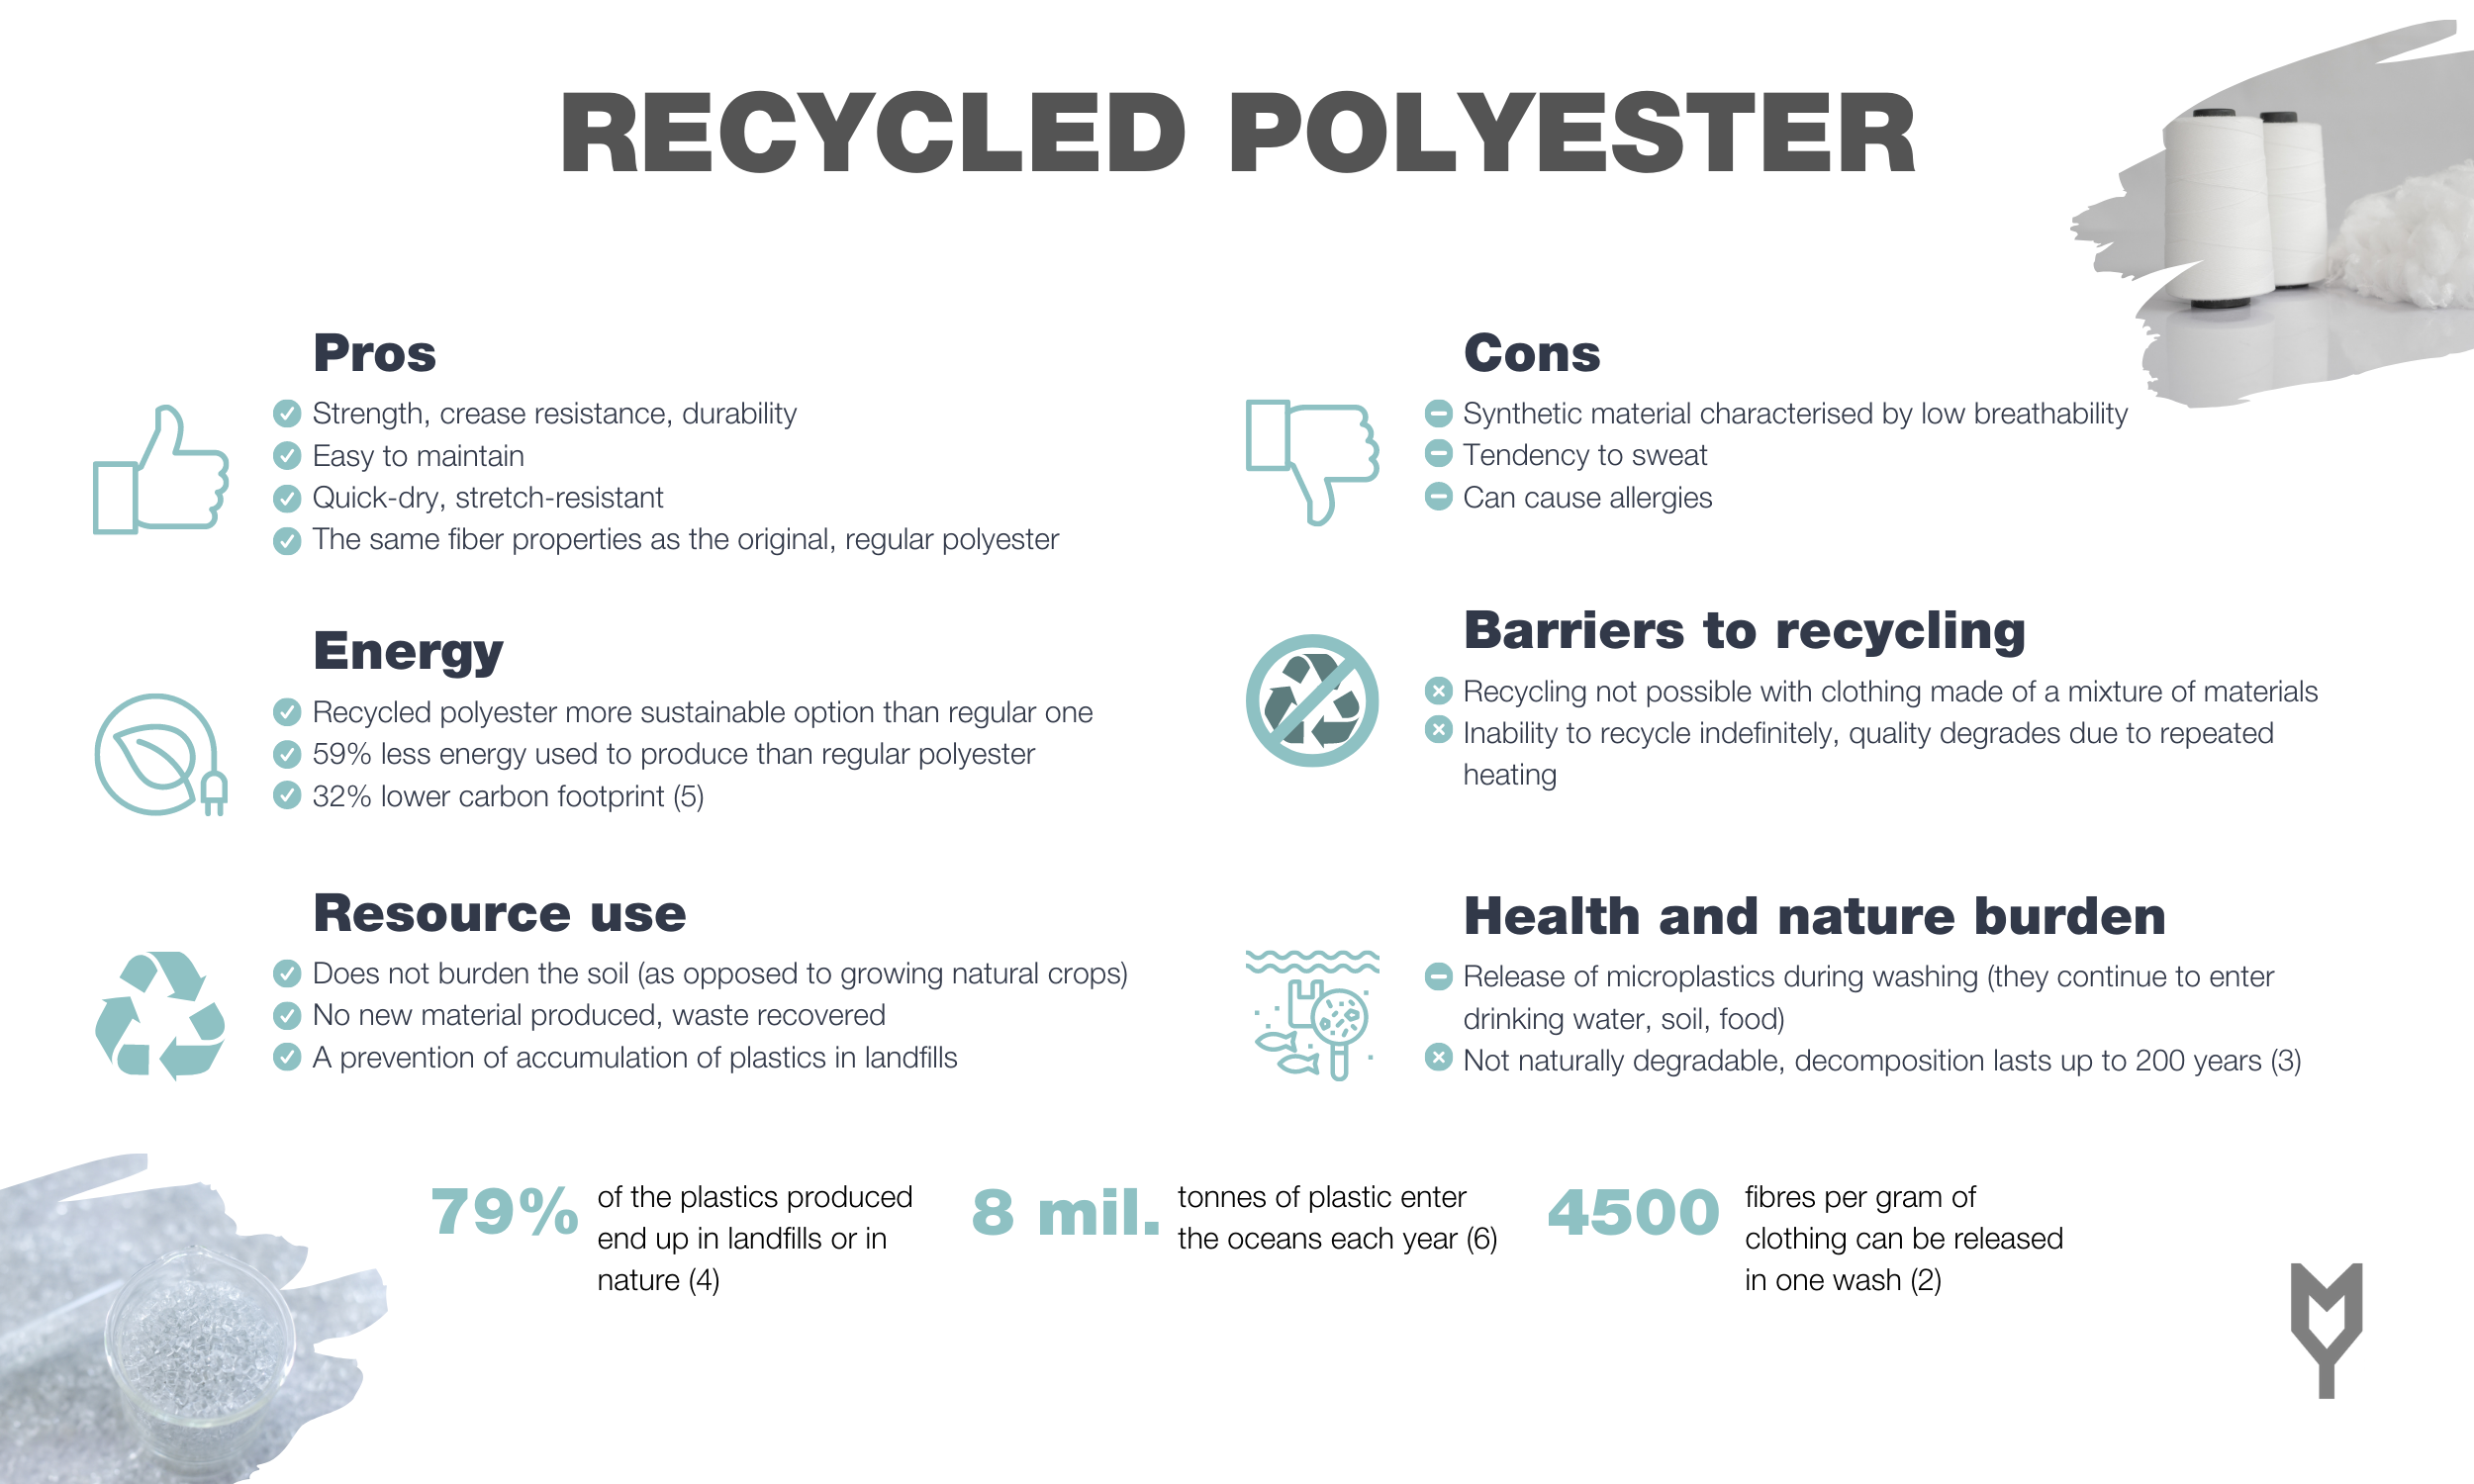 Are you familiar with the textile manufacturing processes? Part 2: RECYCLED  POLYESTER